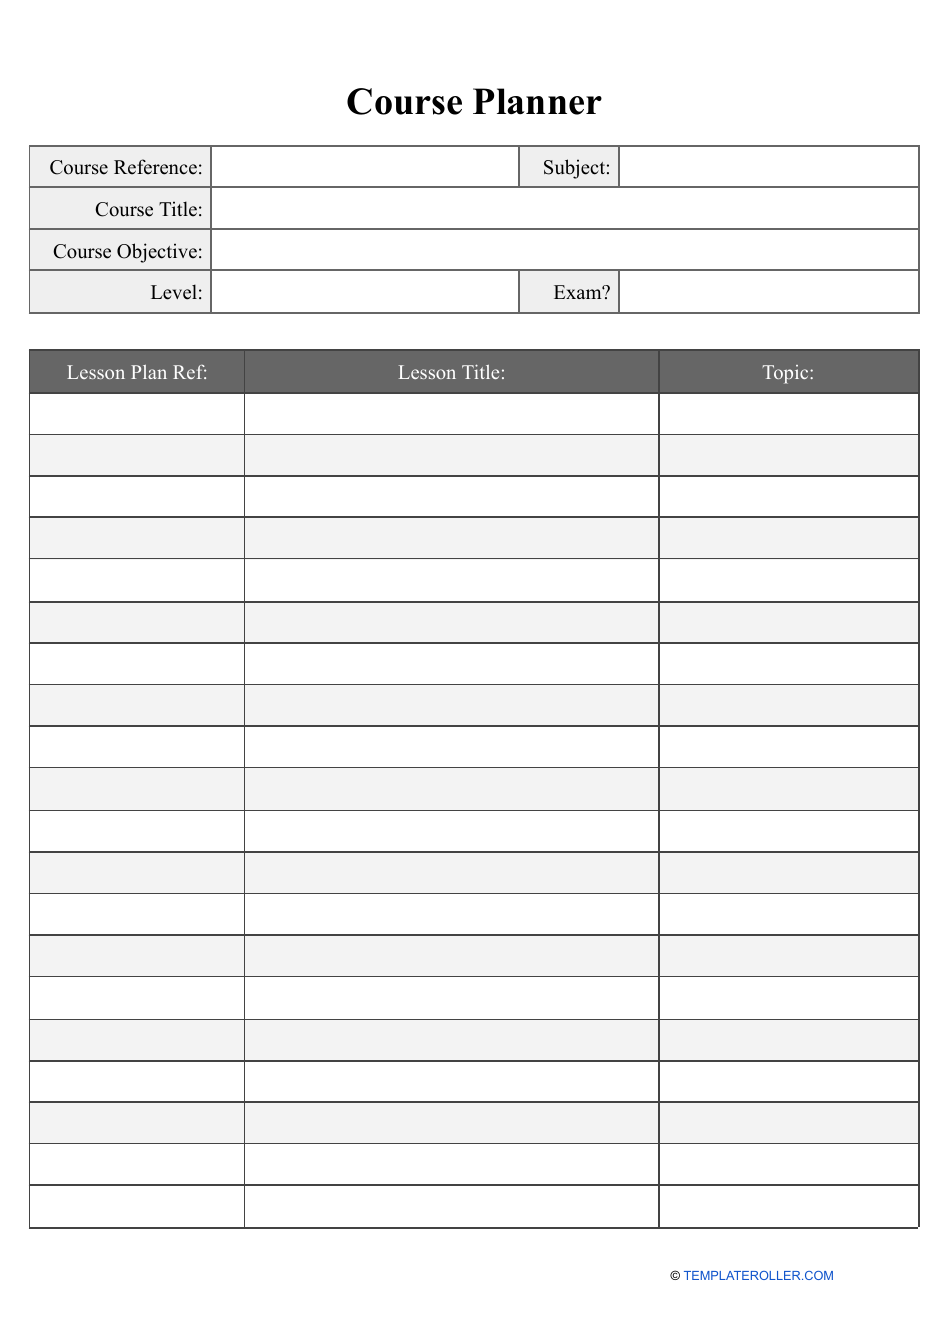 Course Planner Template - Document Preview